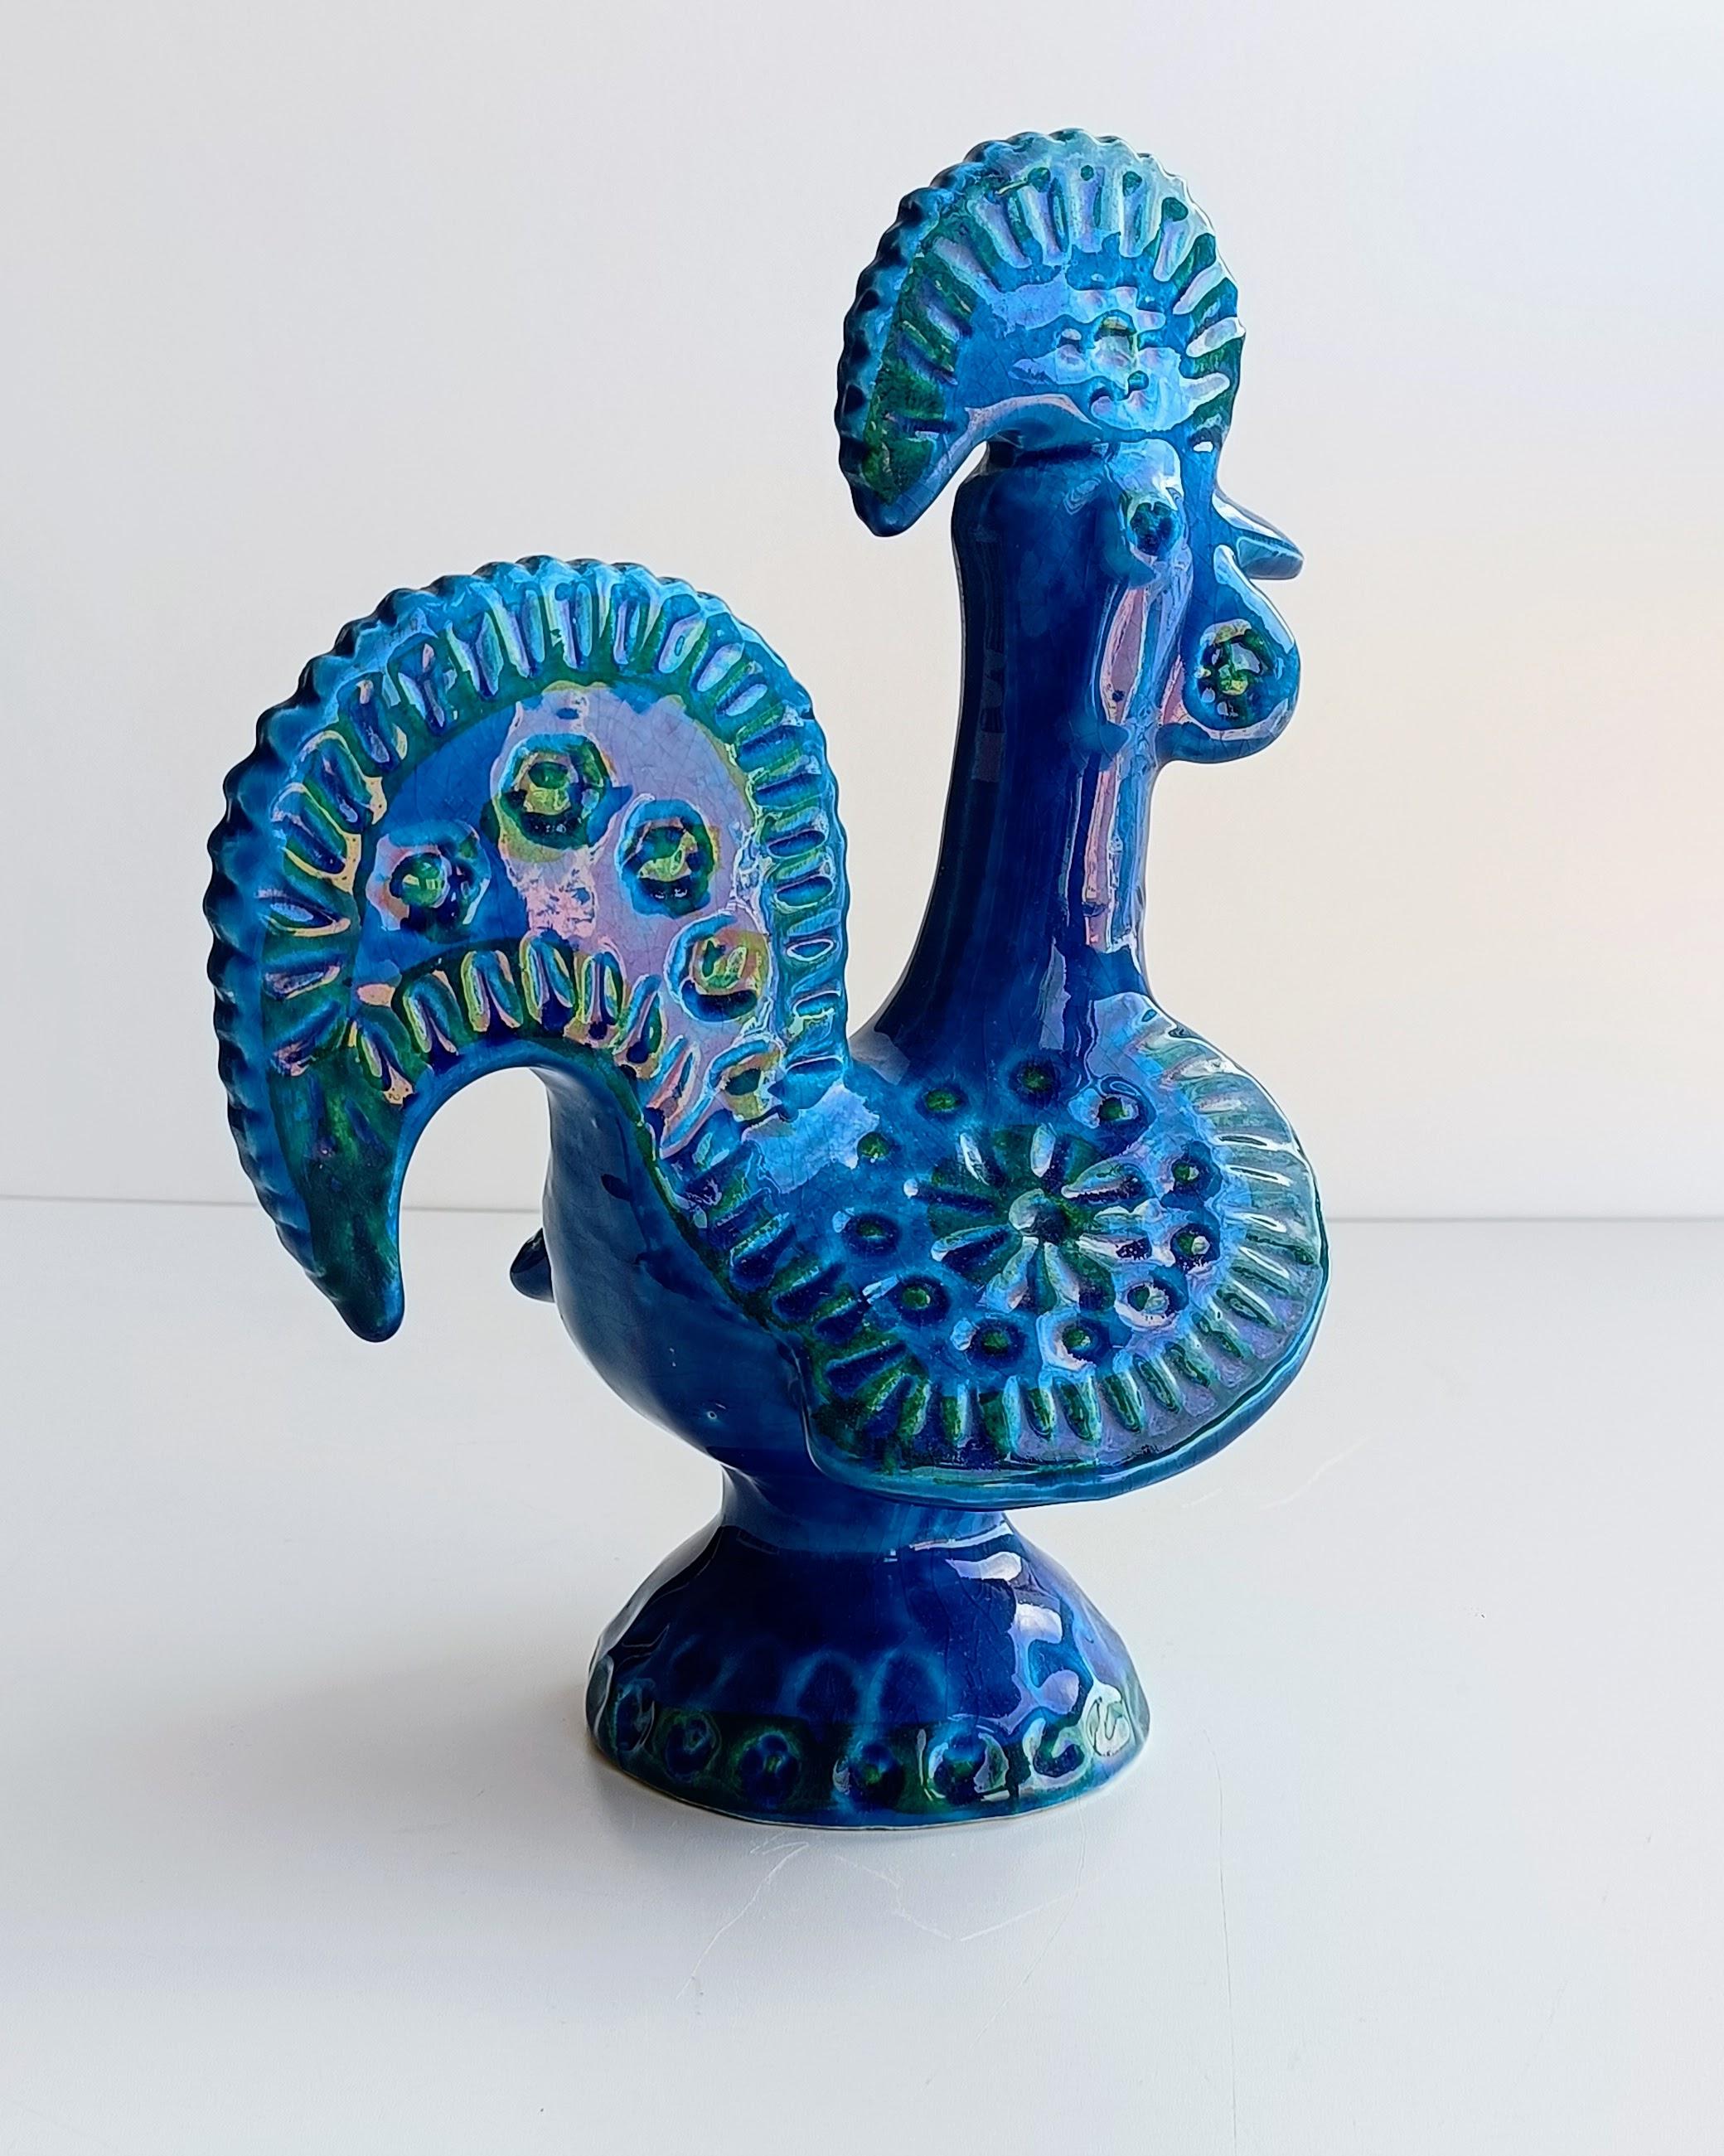 The Bitossi ceramic rooster designed by Aldo Londi is indeed an iconic piece of Italian pottery from the 1960s. Aldo Londi was a prominent designer for the Bitossi Ceramiche company, which was founded in 1921 in Montelupo Fiorentino, near Florence,